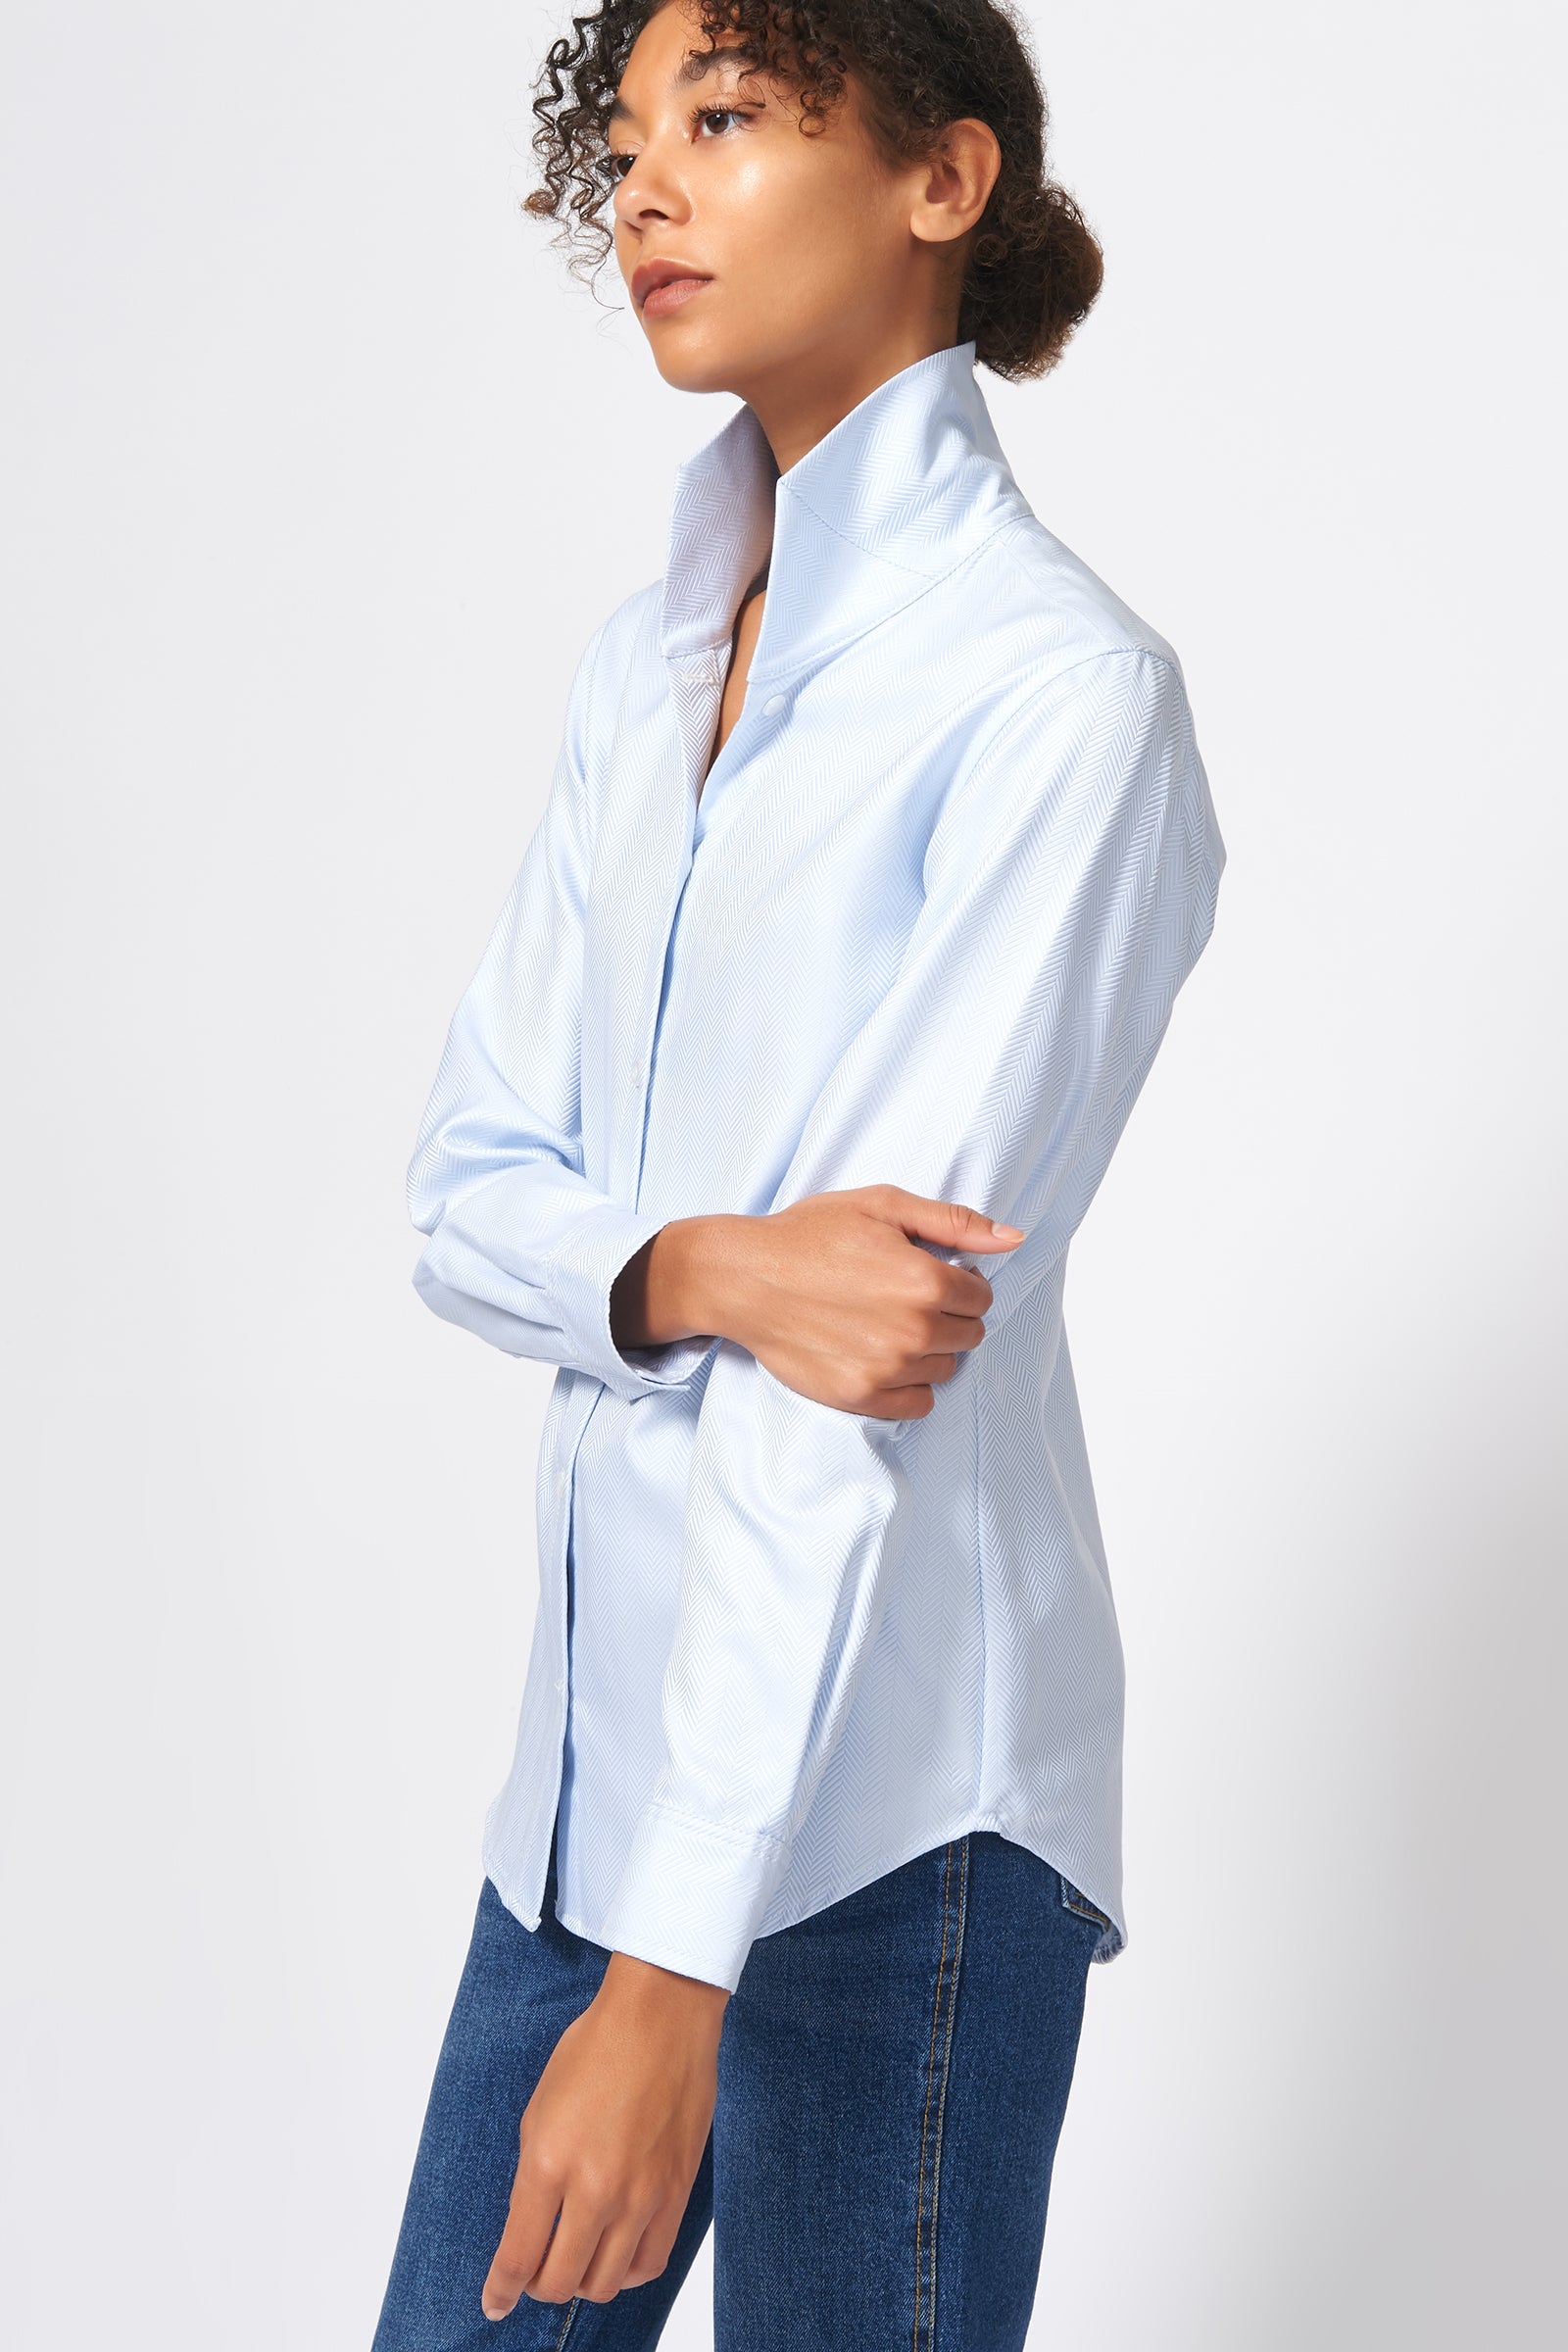 Ginna Tailored Shirt in French Blue Herringbone from 100% Cotton – KAL ...